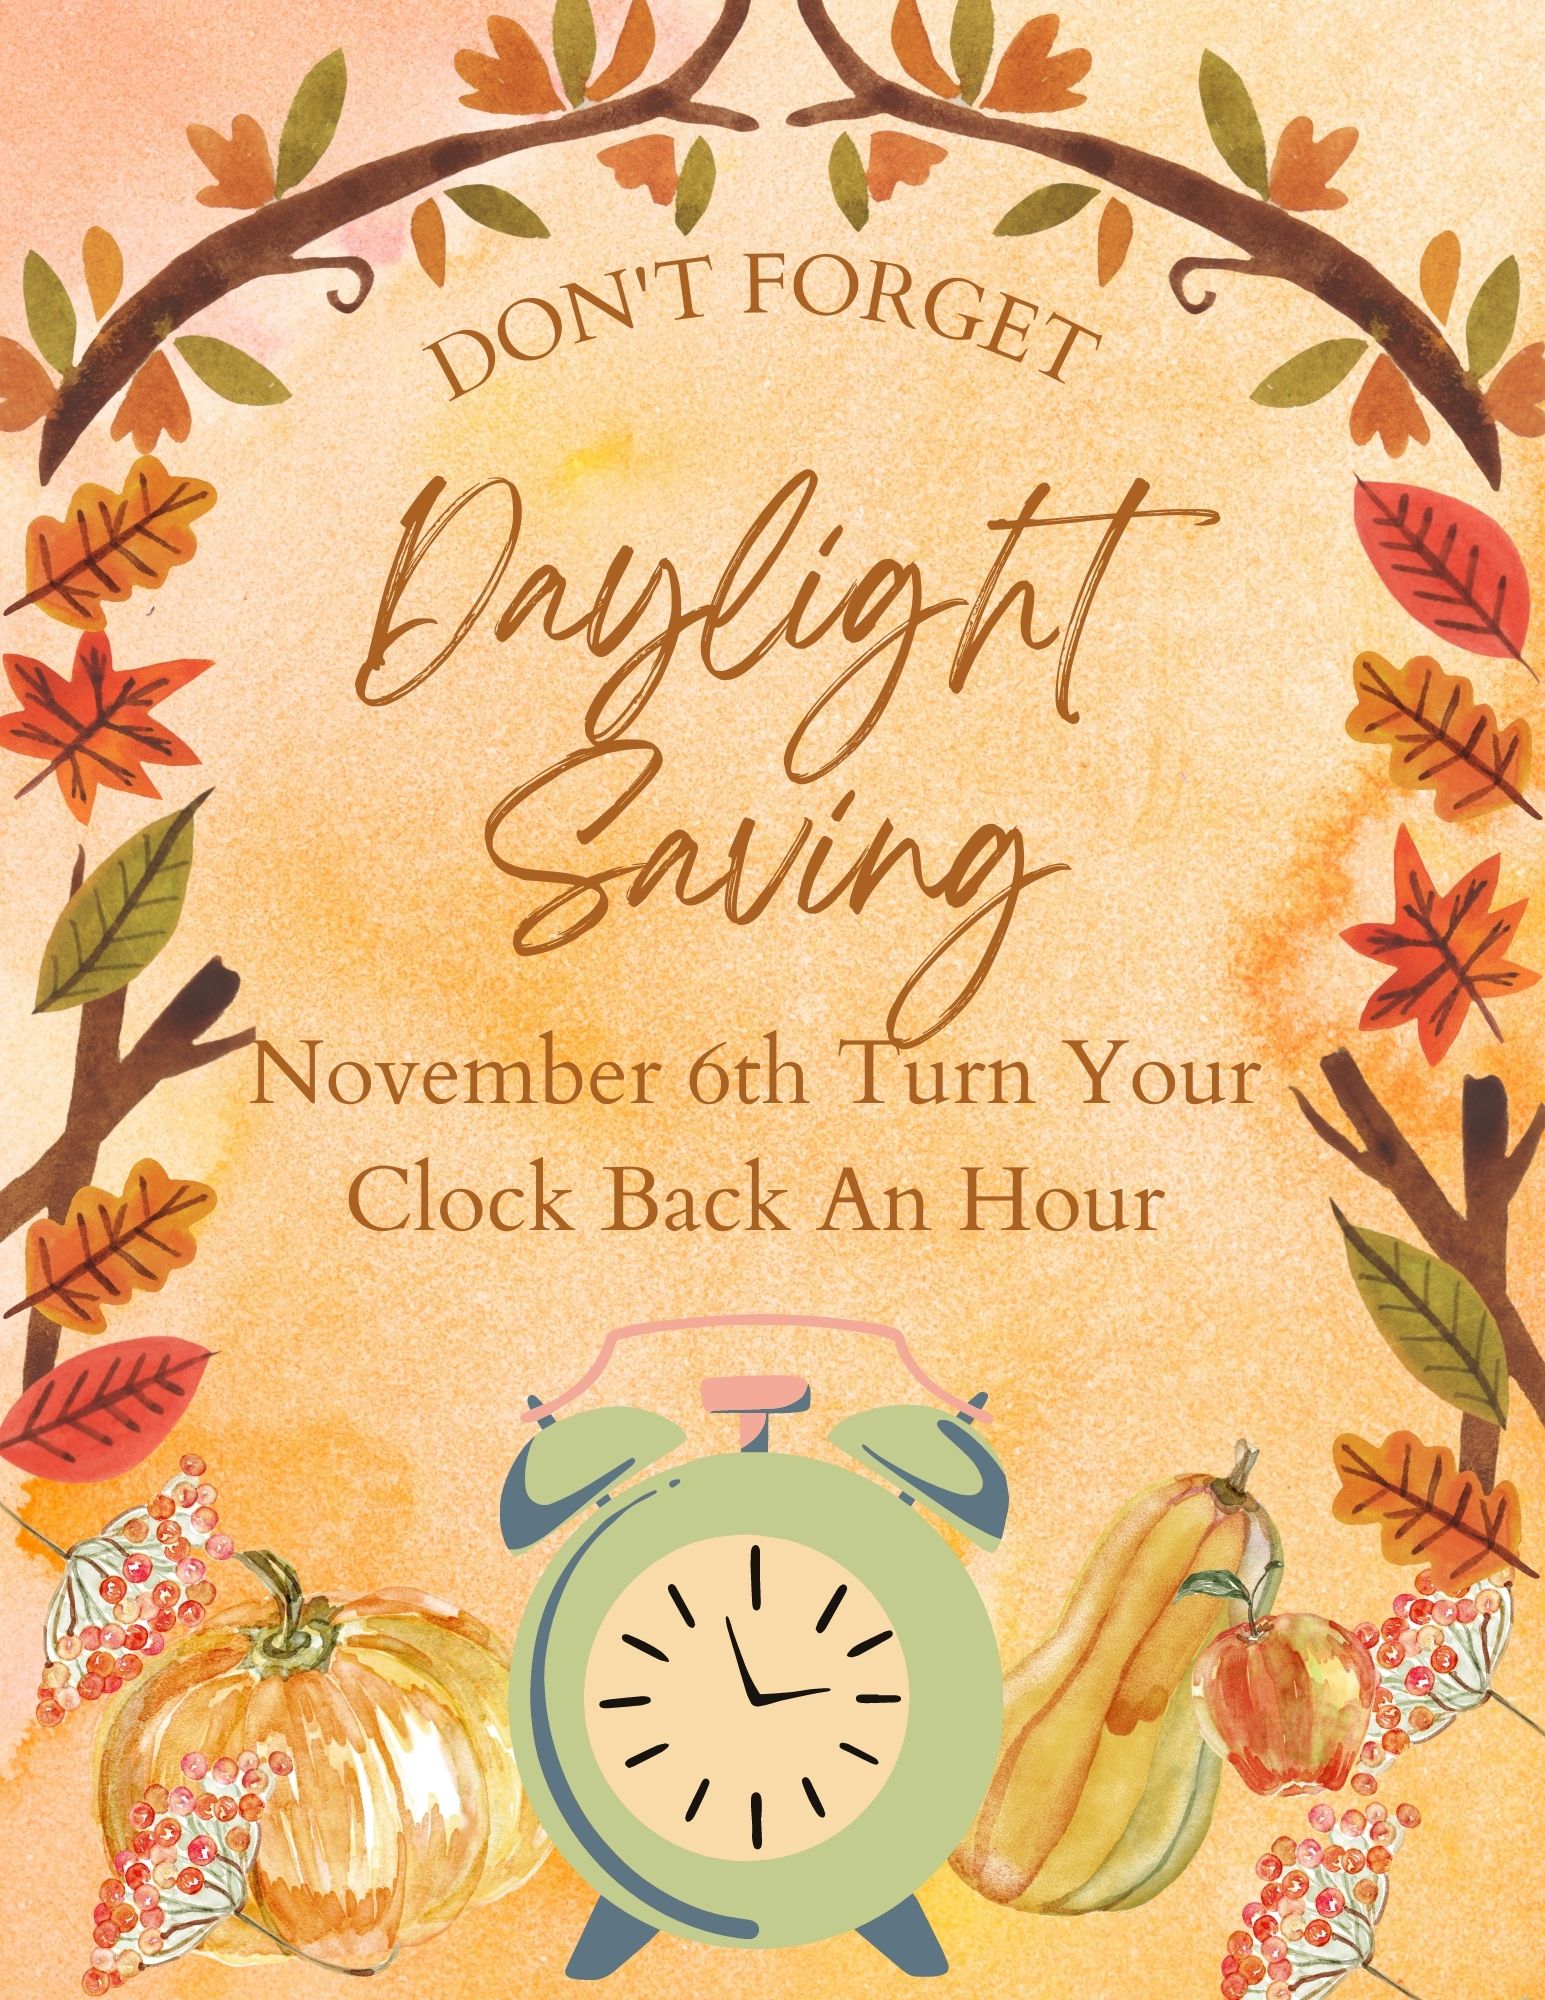 Don't forget: Apartments in Stone Oak, daylight savings time, November - turn your clock back an hour.